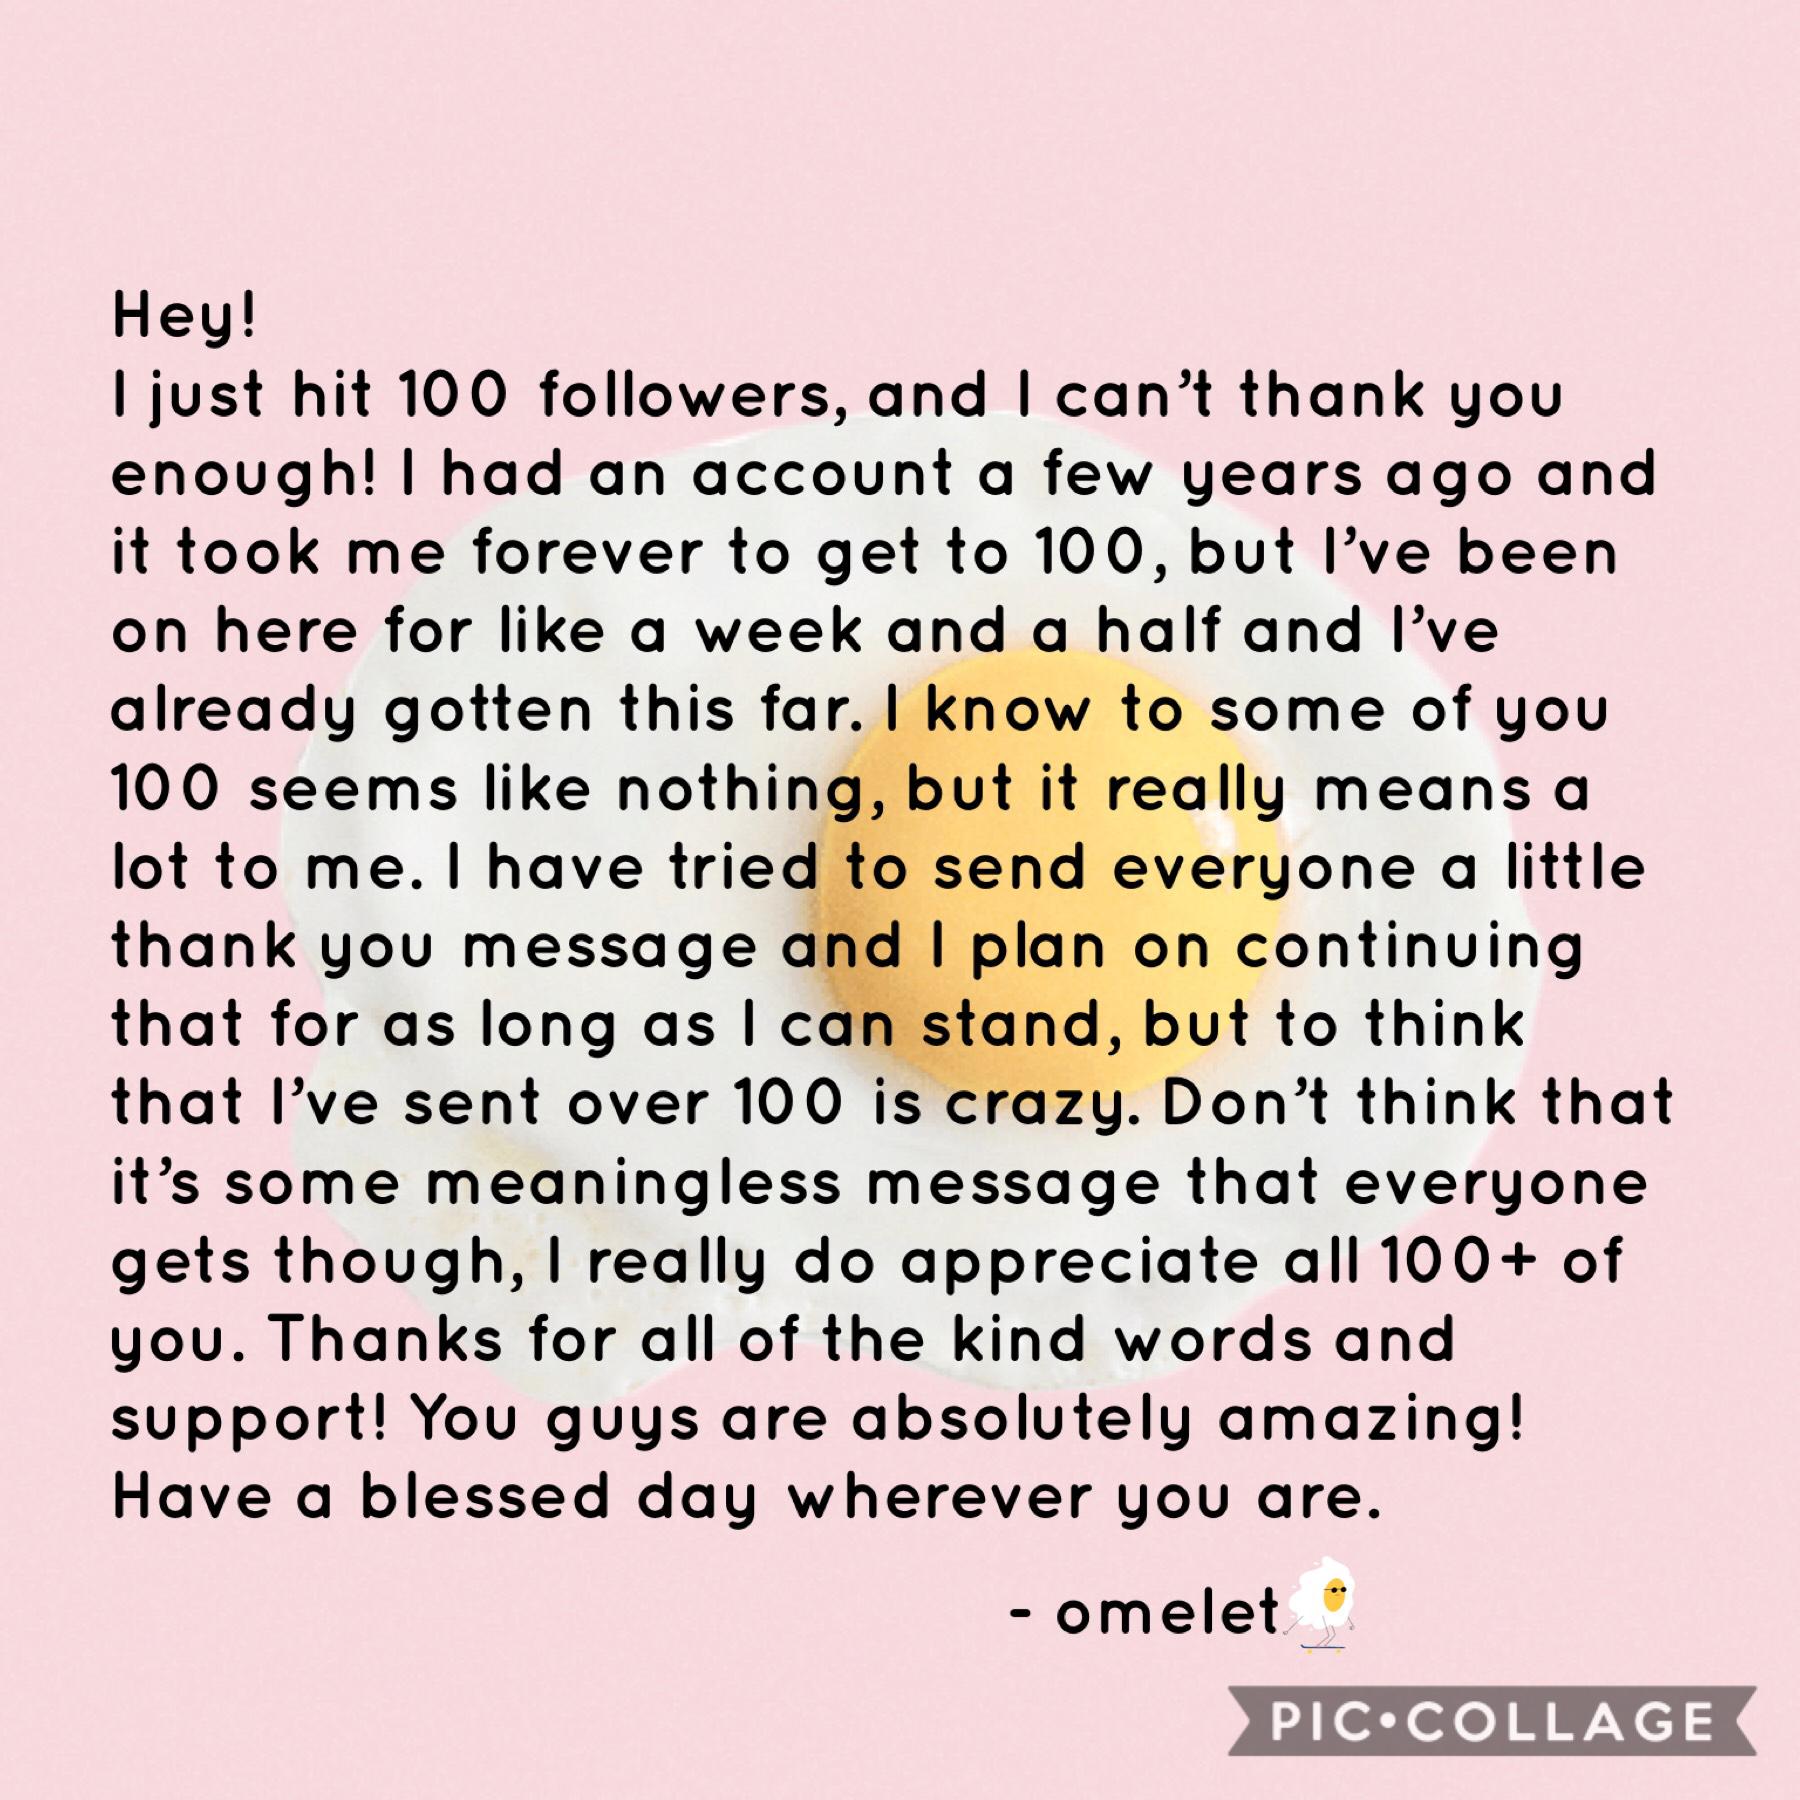 Thank you so much!!! ❤️❤️❤️